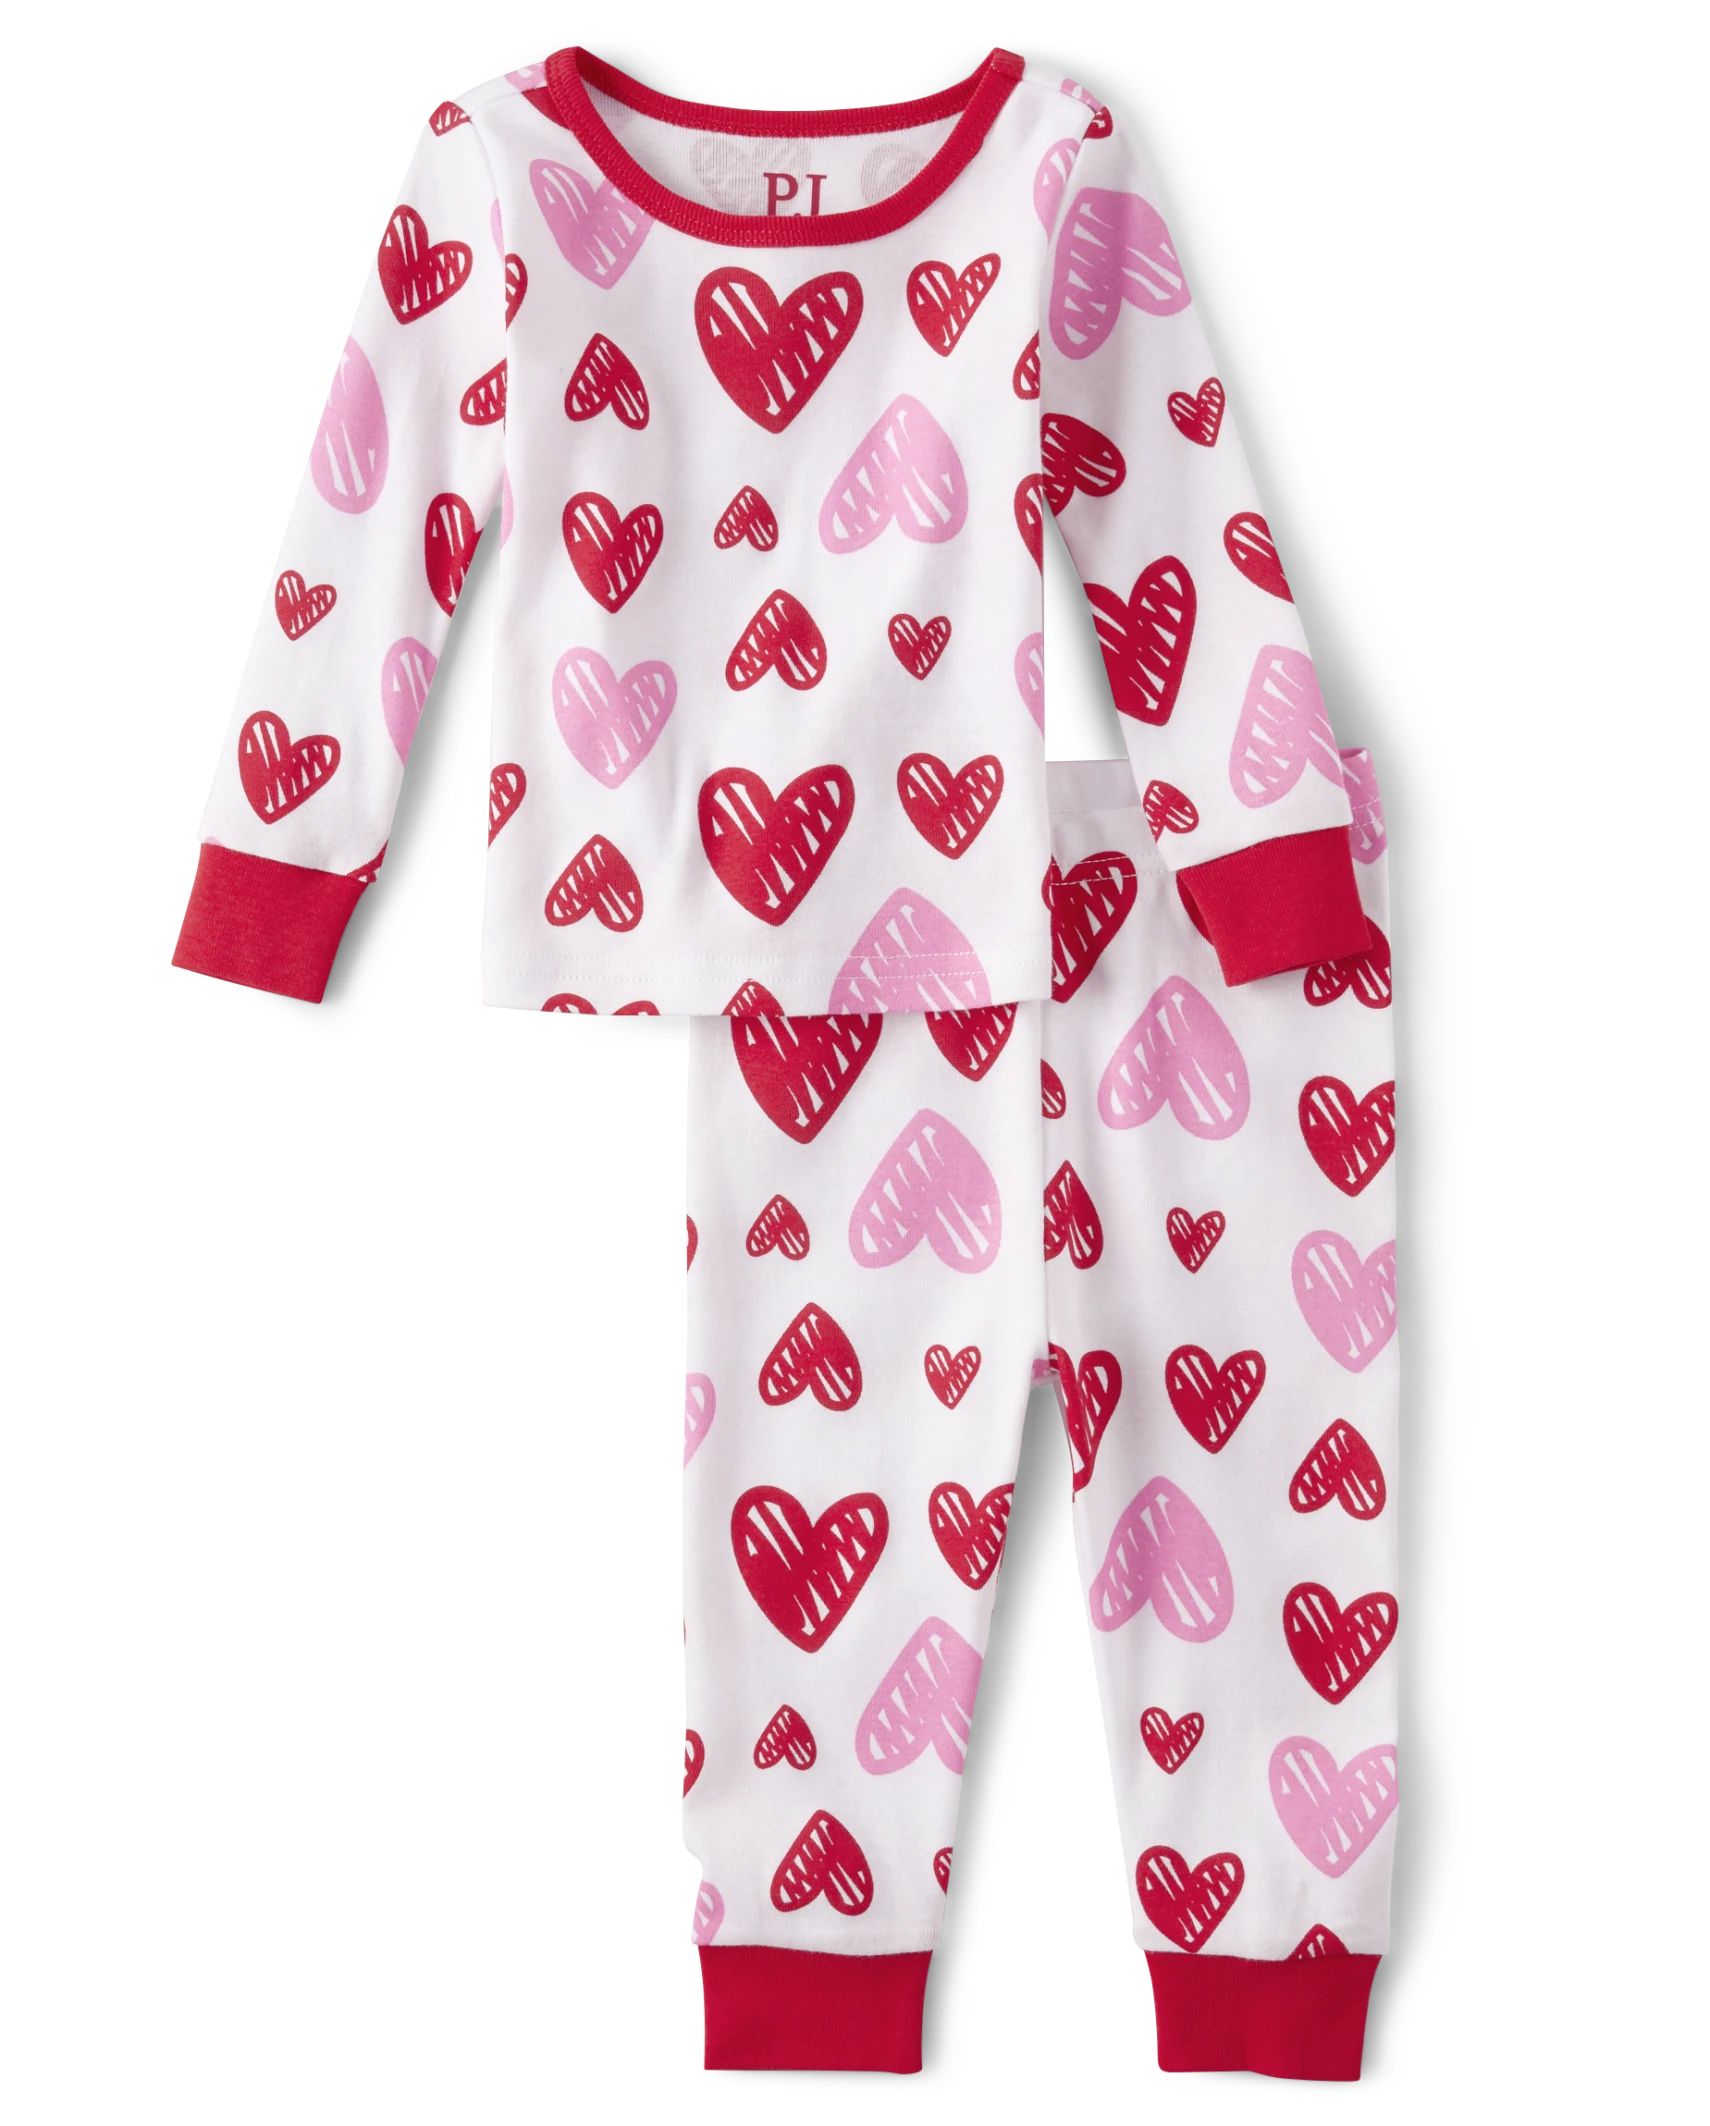 Baby And Toddler Girls Heart Snug Fit Cotton Pajamas - white | PJ Place